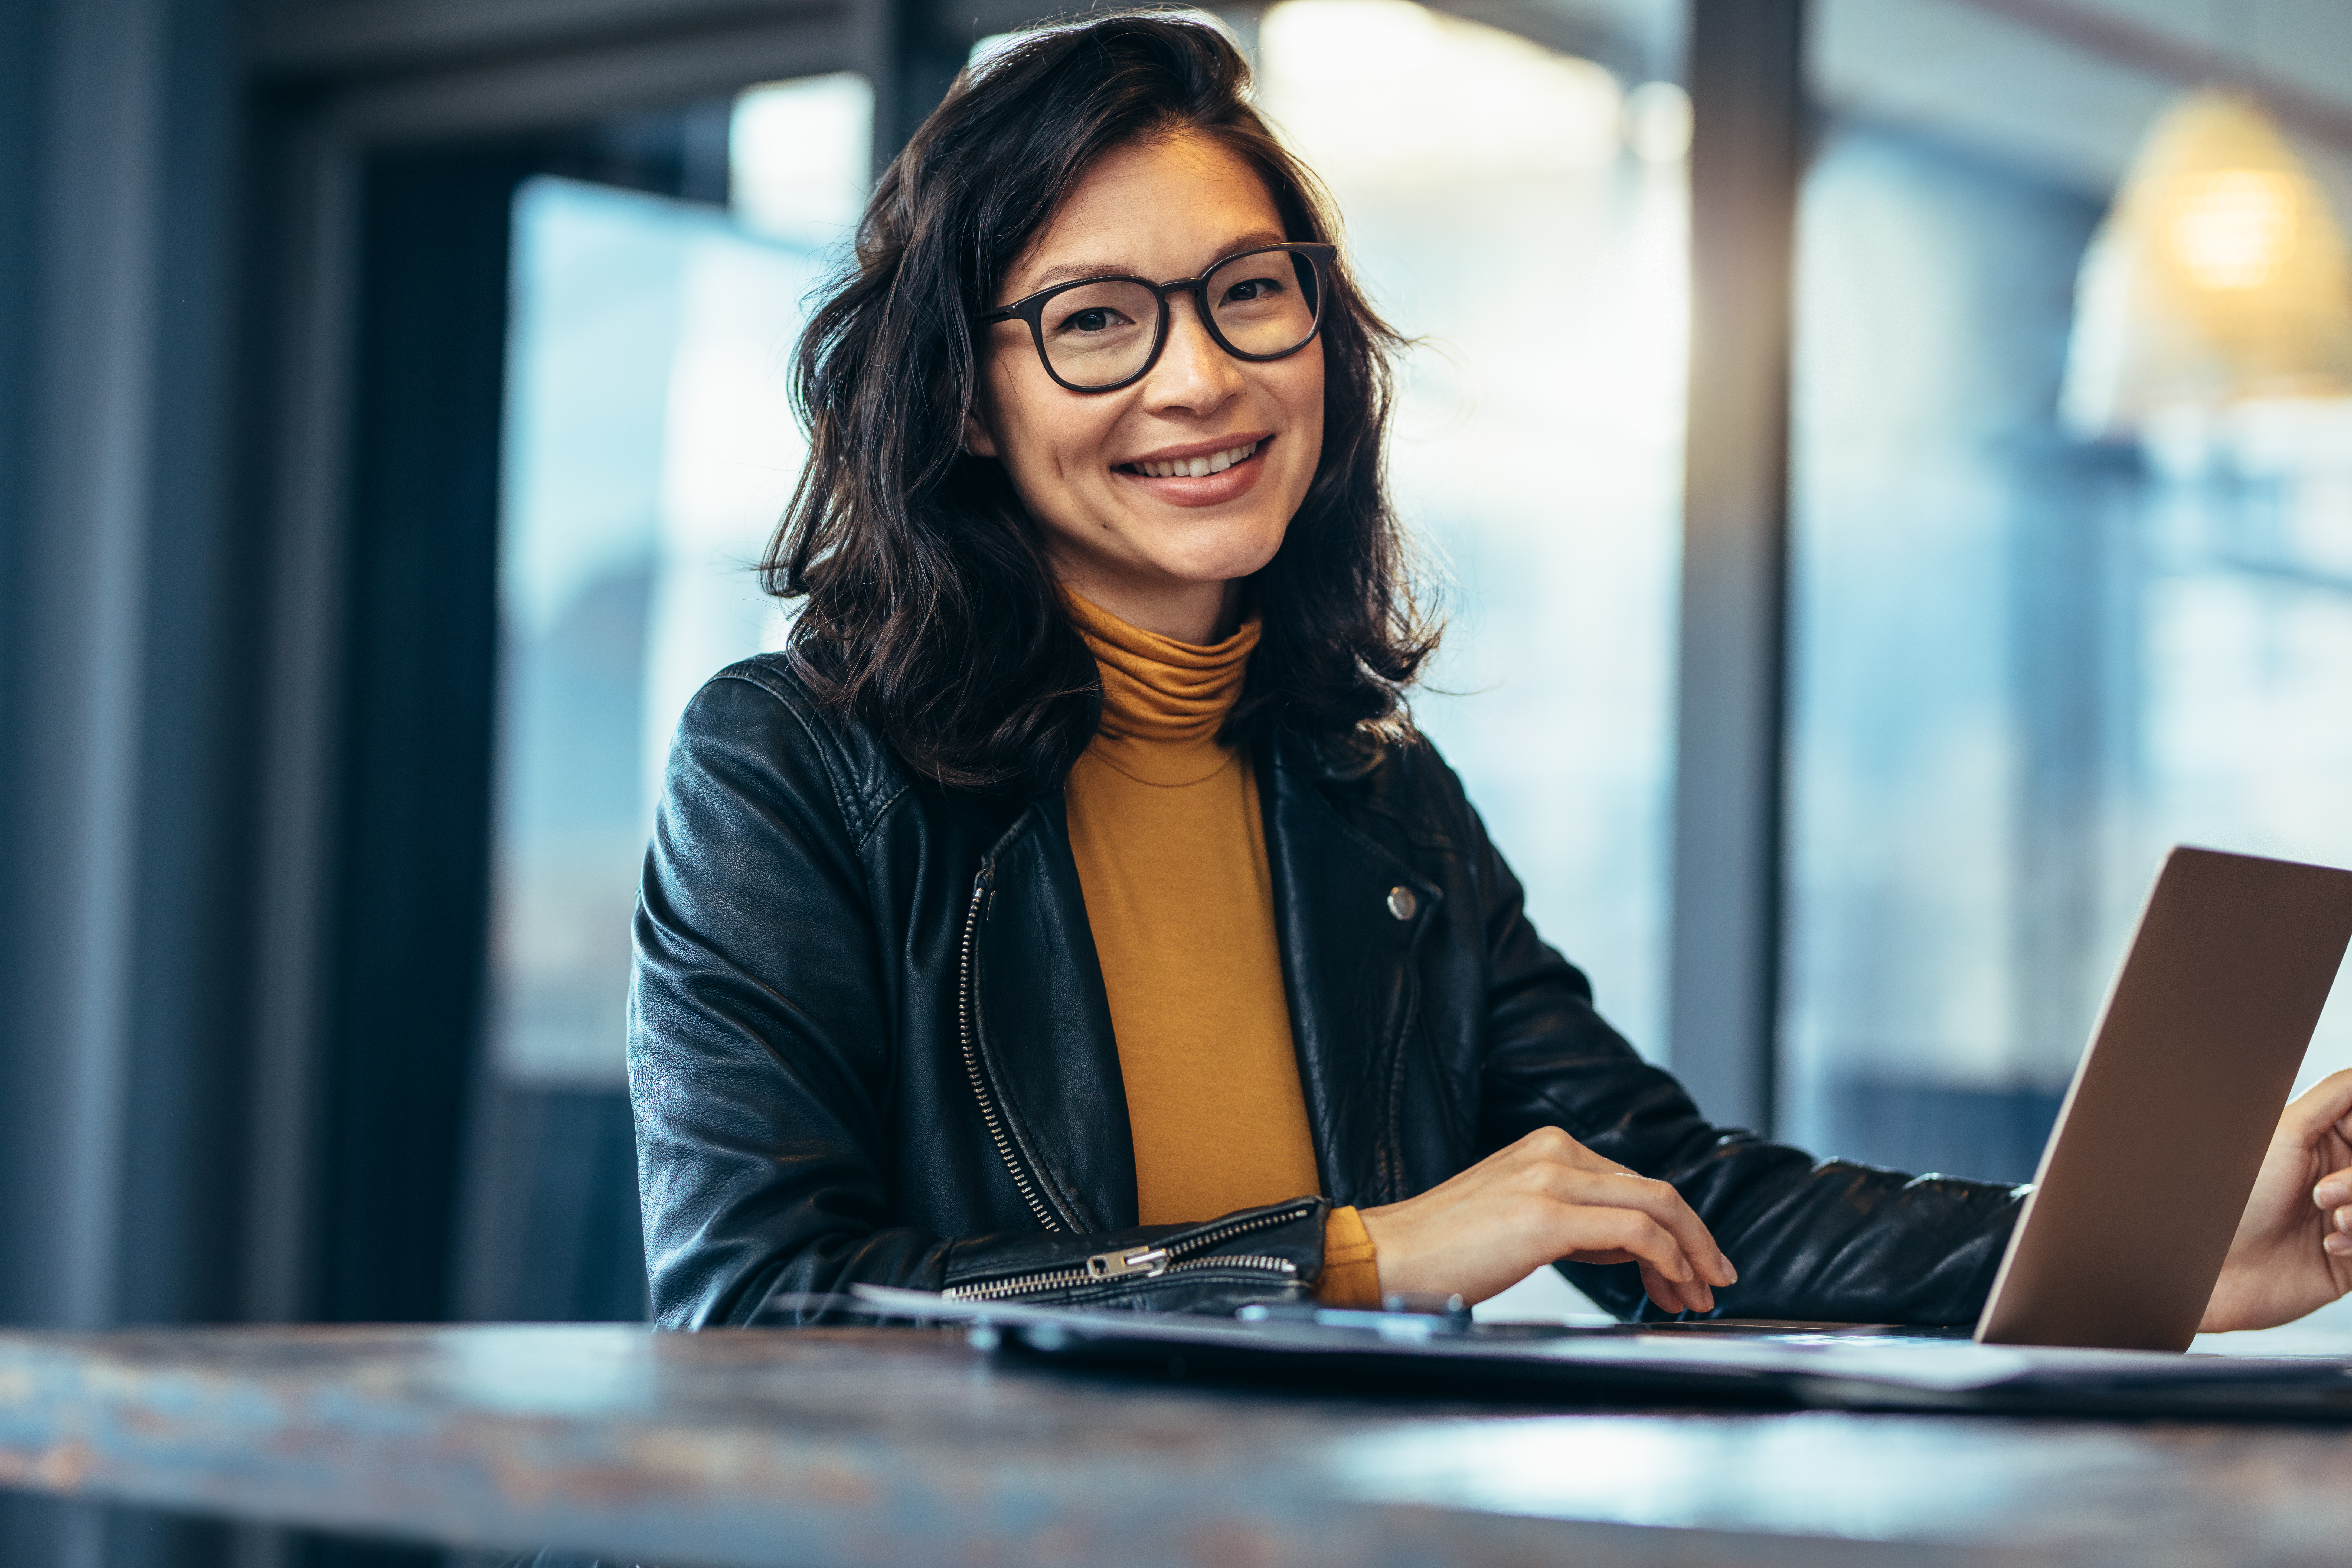 Professional woman smiling at desk on laptop